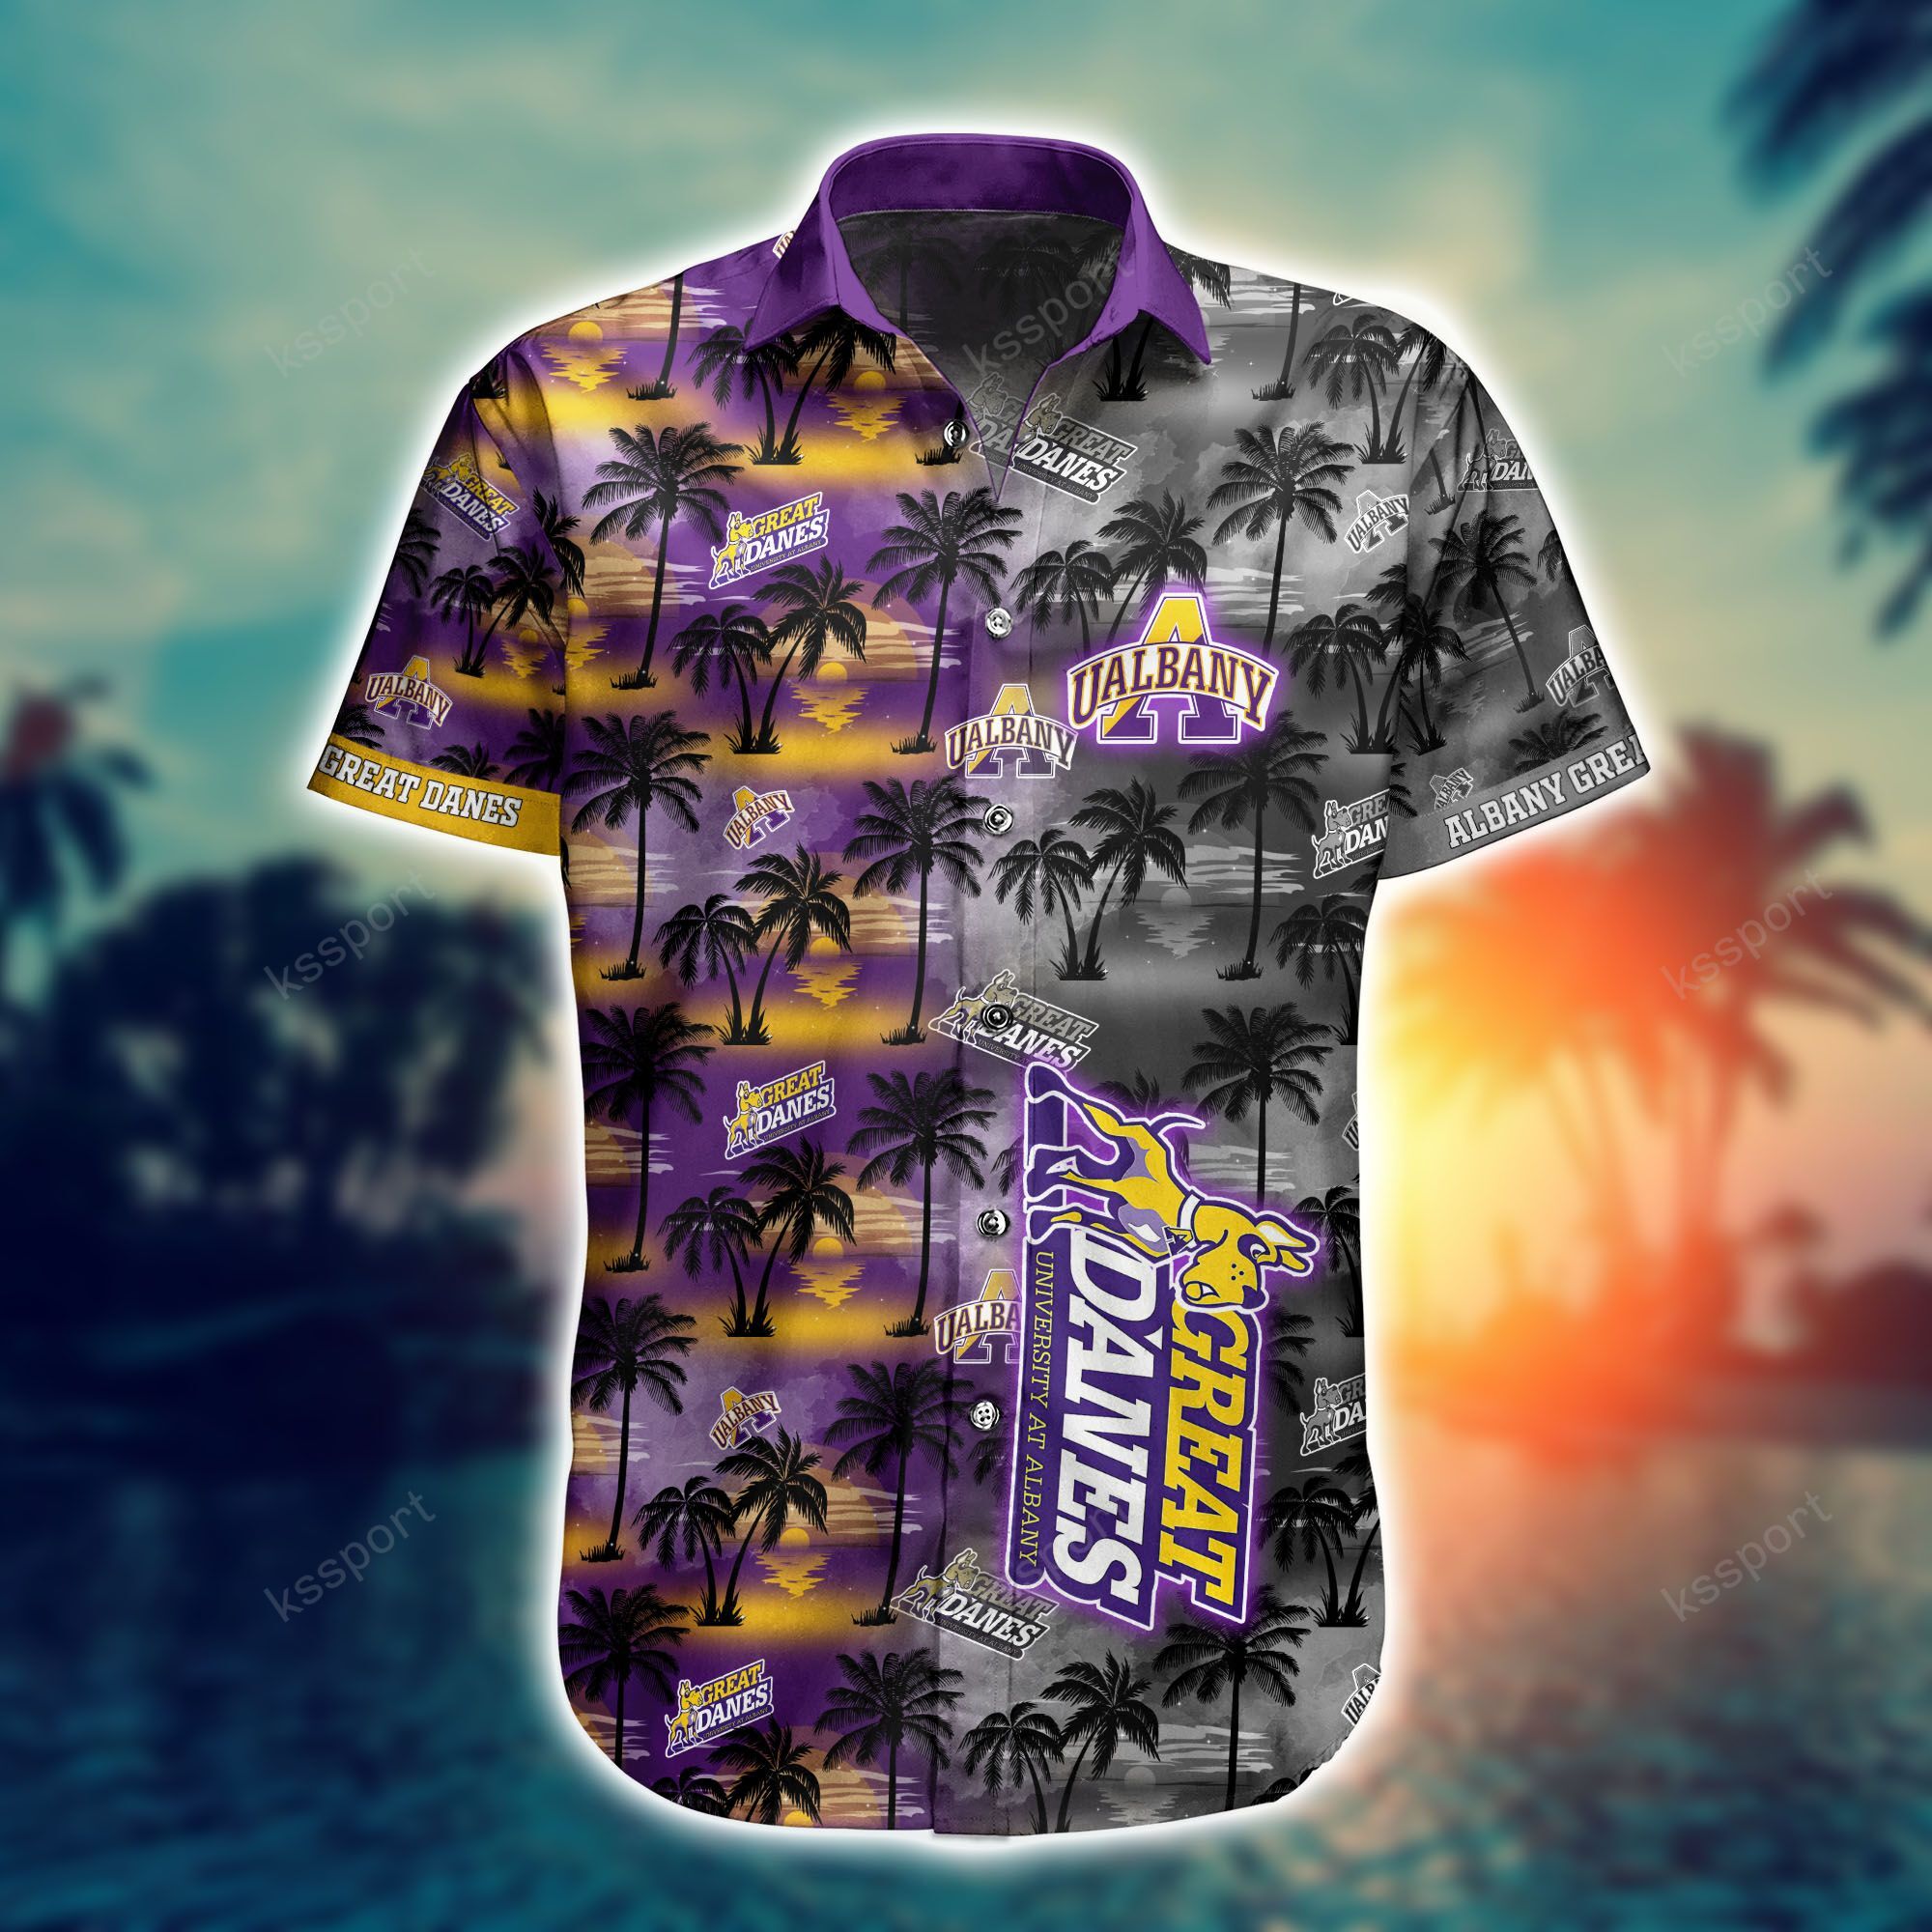 Top cool Hawaiian shirt 2022 - Make sure you get yours today before they run out! 117